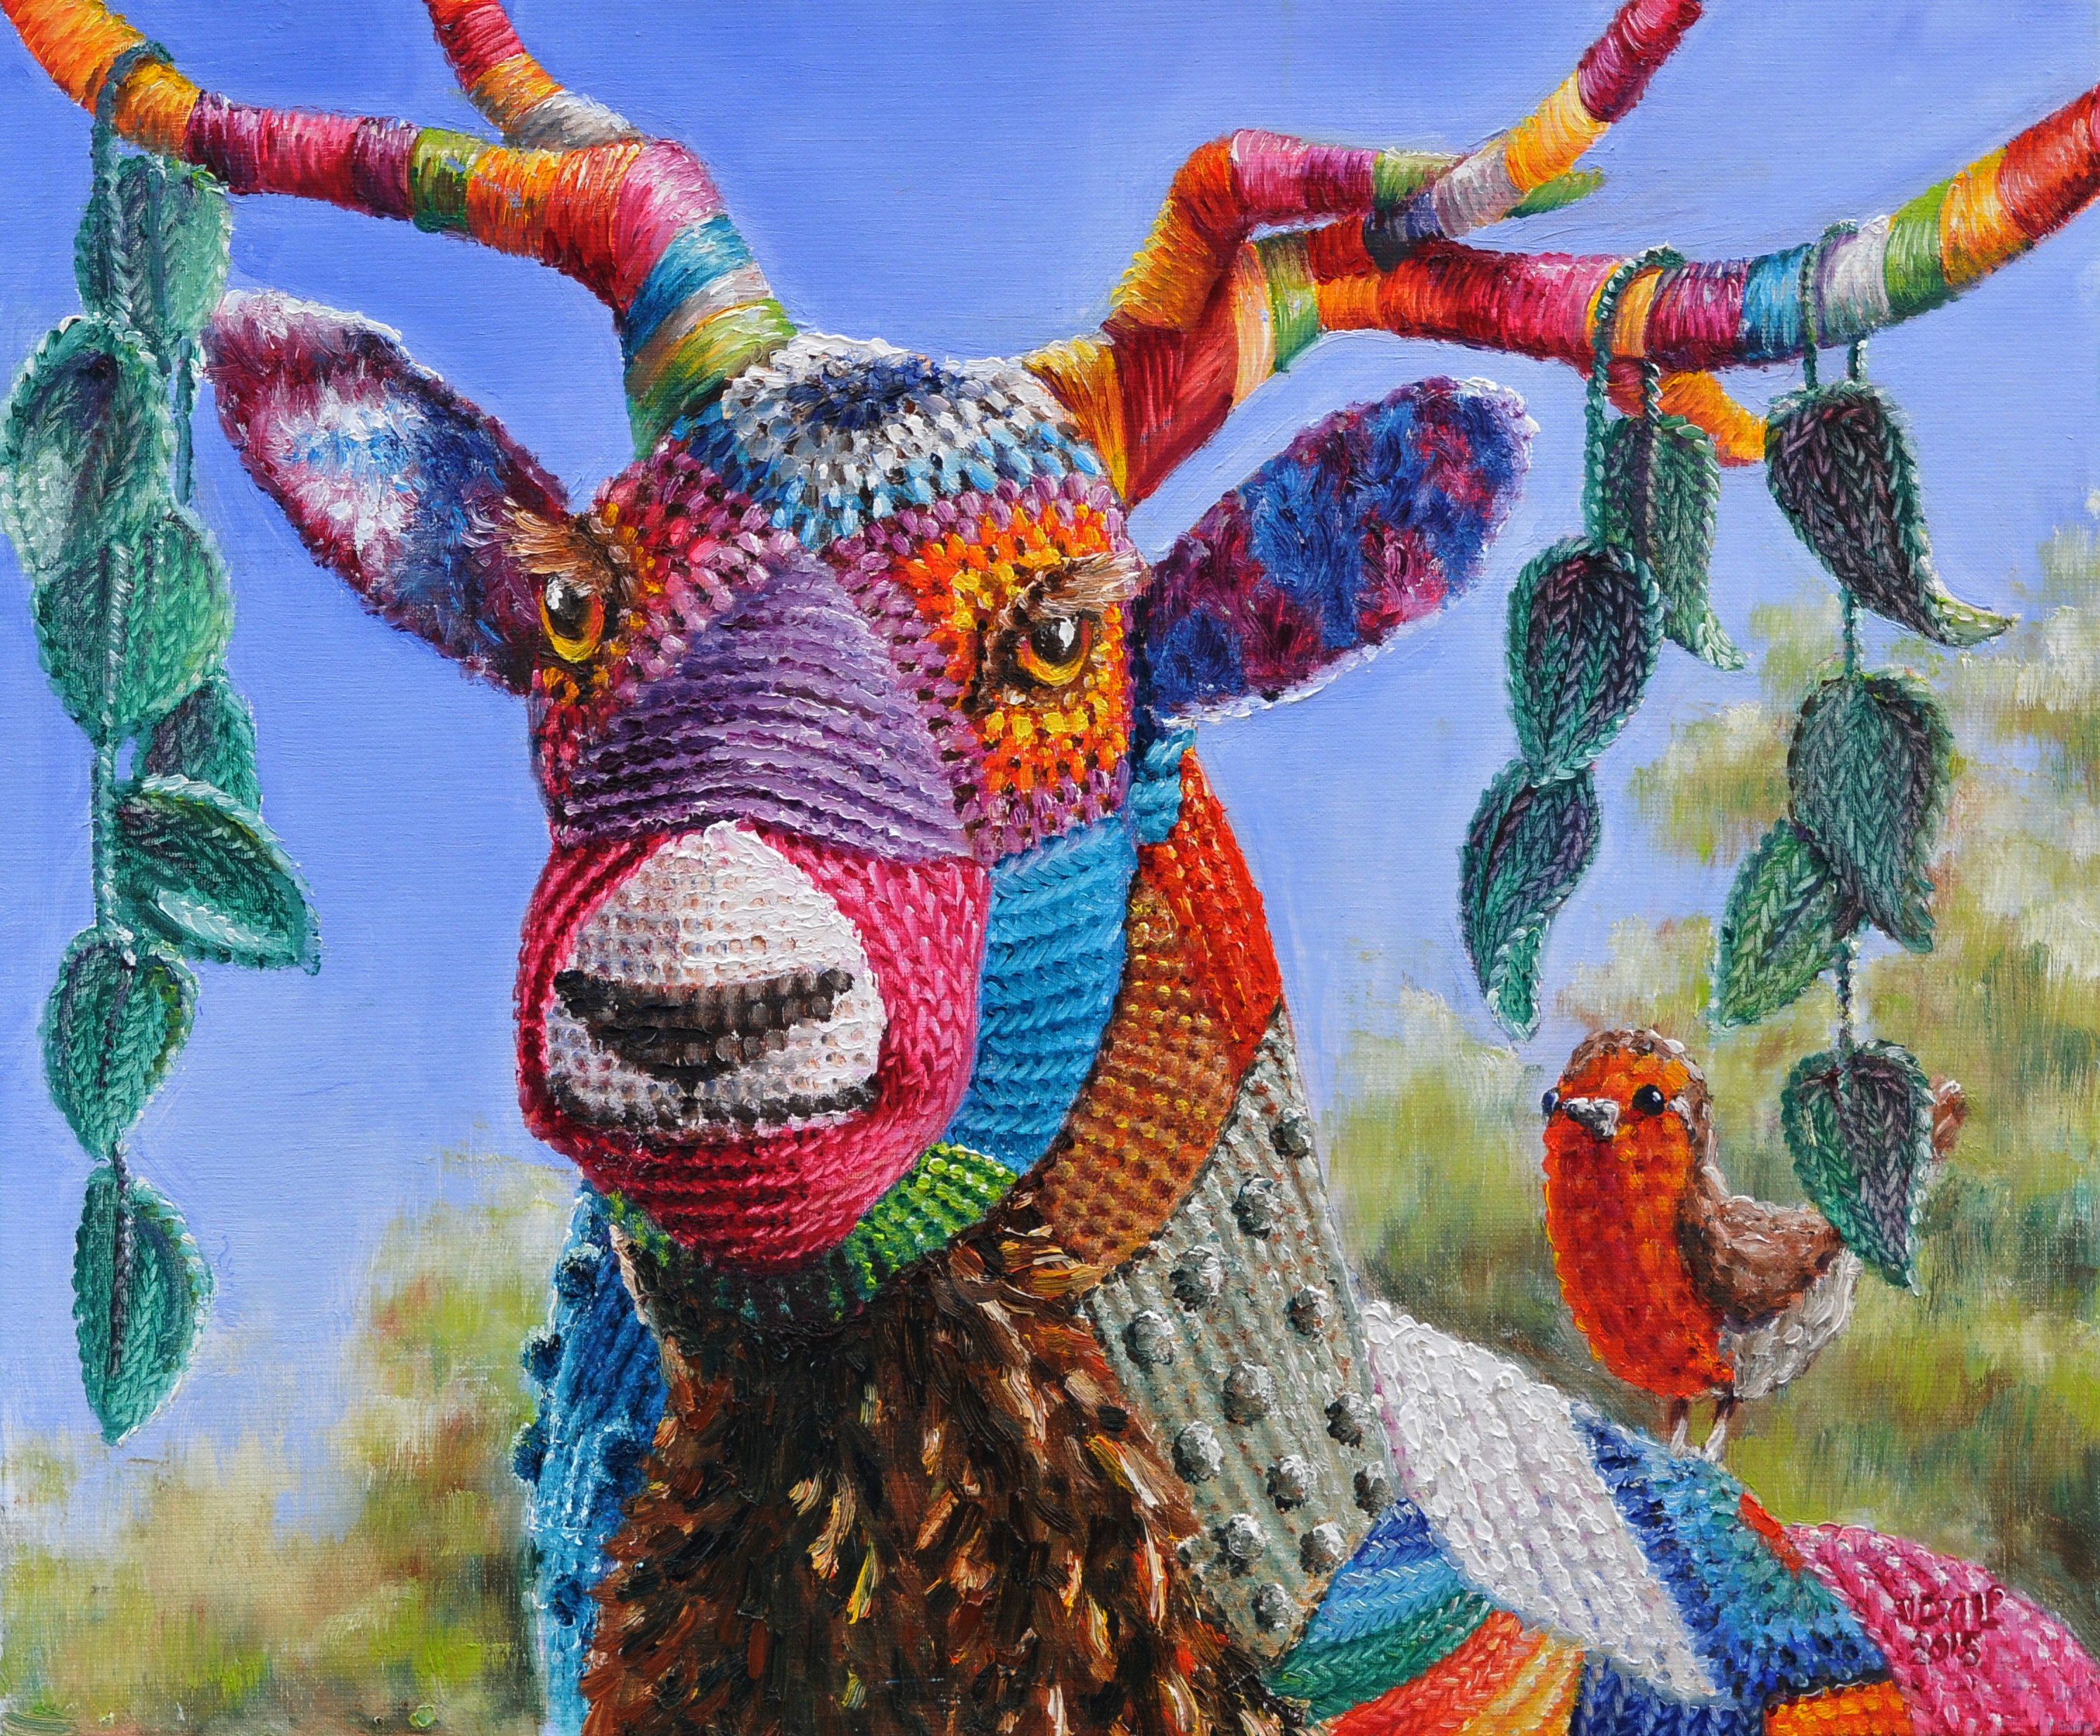 Yarn bombed deer | Oil paint on linen | Year: 2015 | Dimensions: 50x60cm